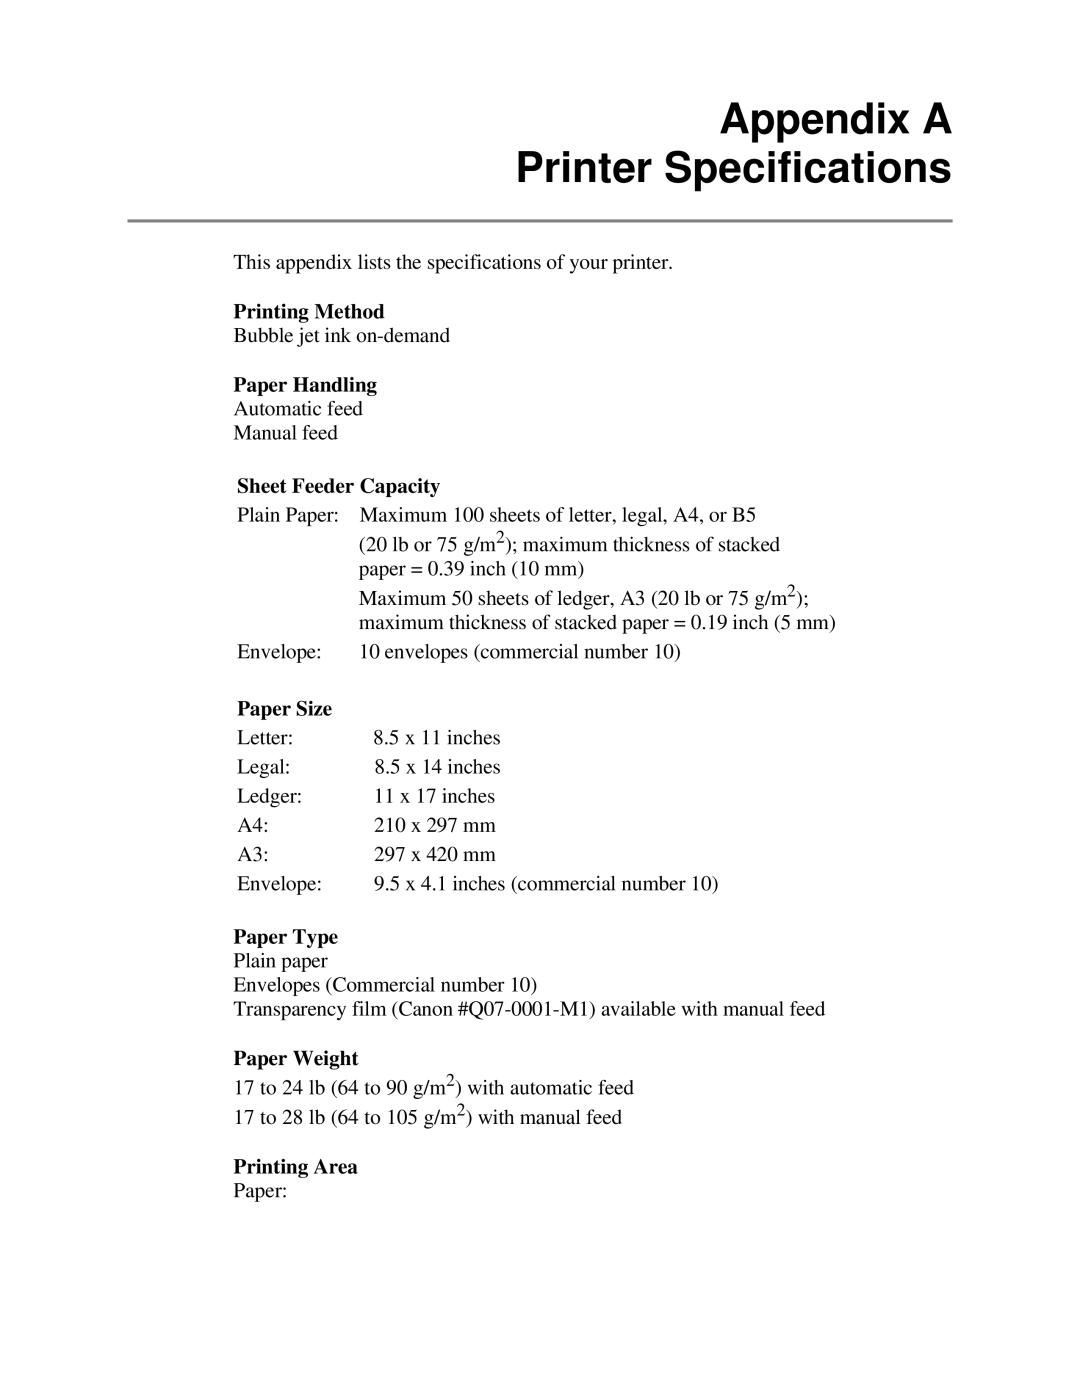 Canon BJ-230 Appendix A Printer Specifications, Printing Method, Paper Handling, Sheet Feeder Capacity, Paper Size 